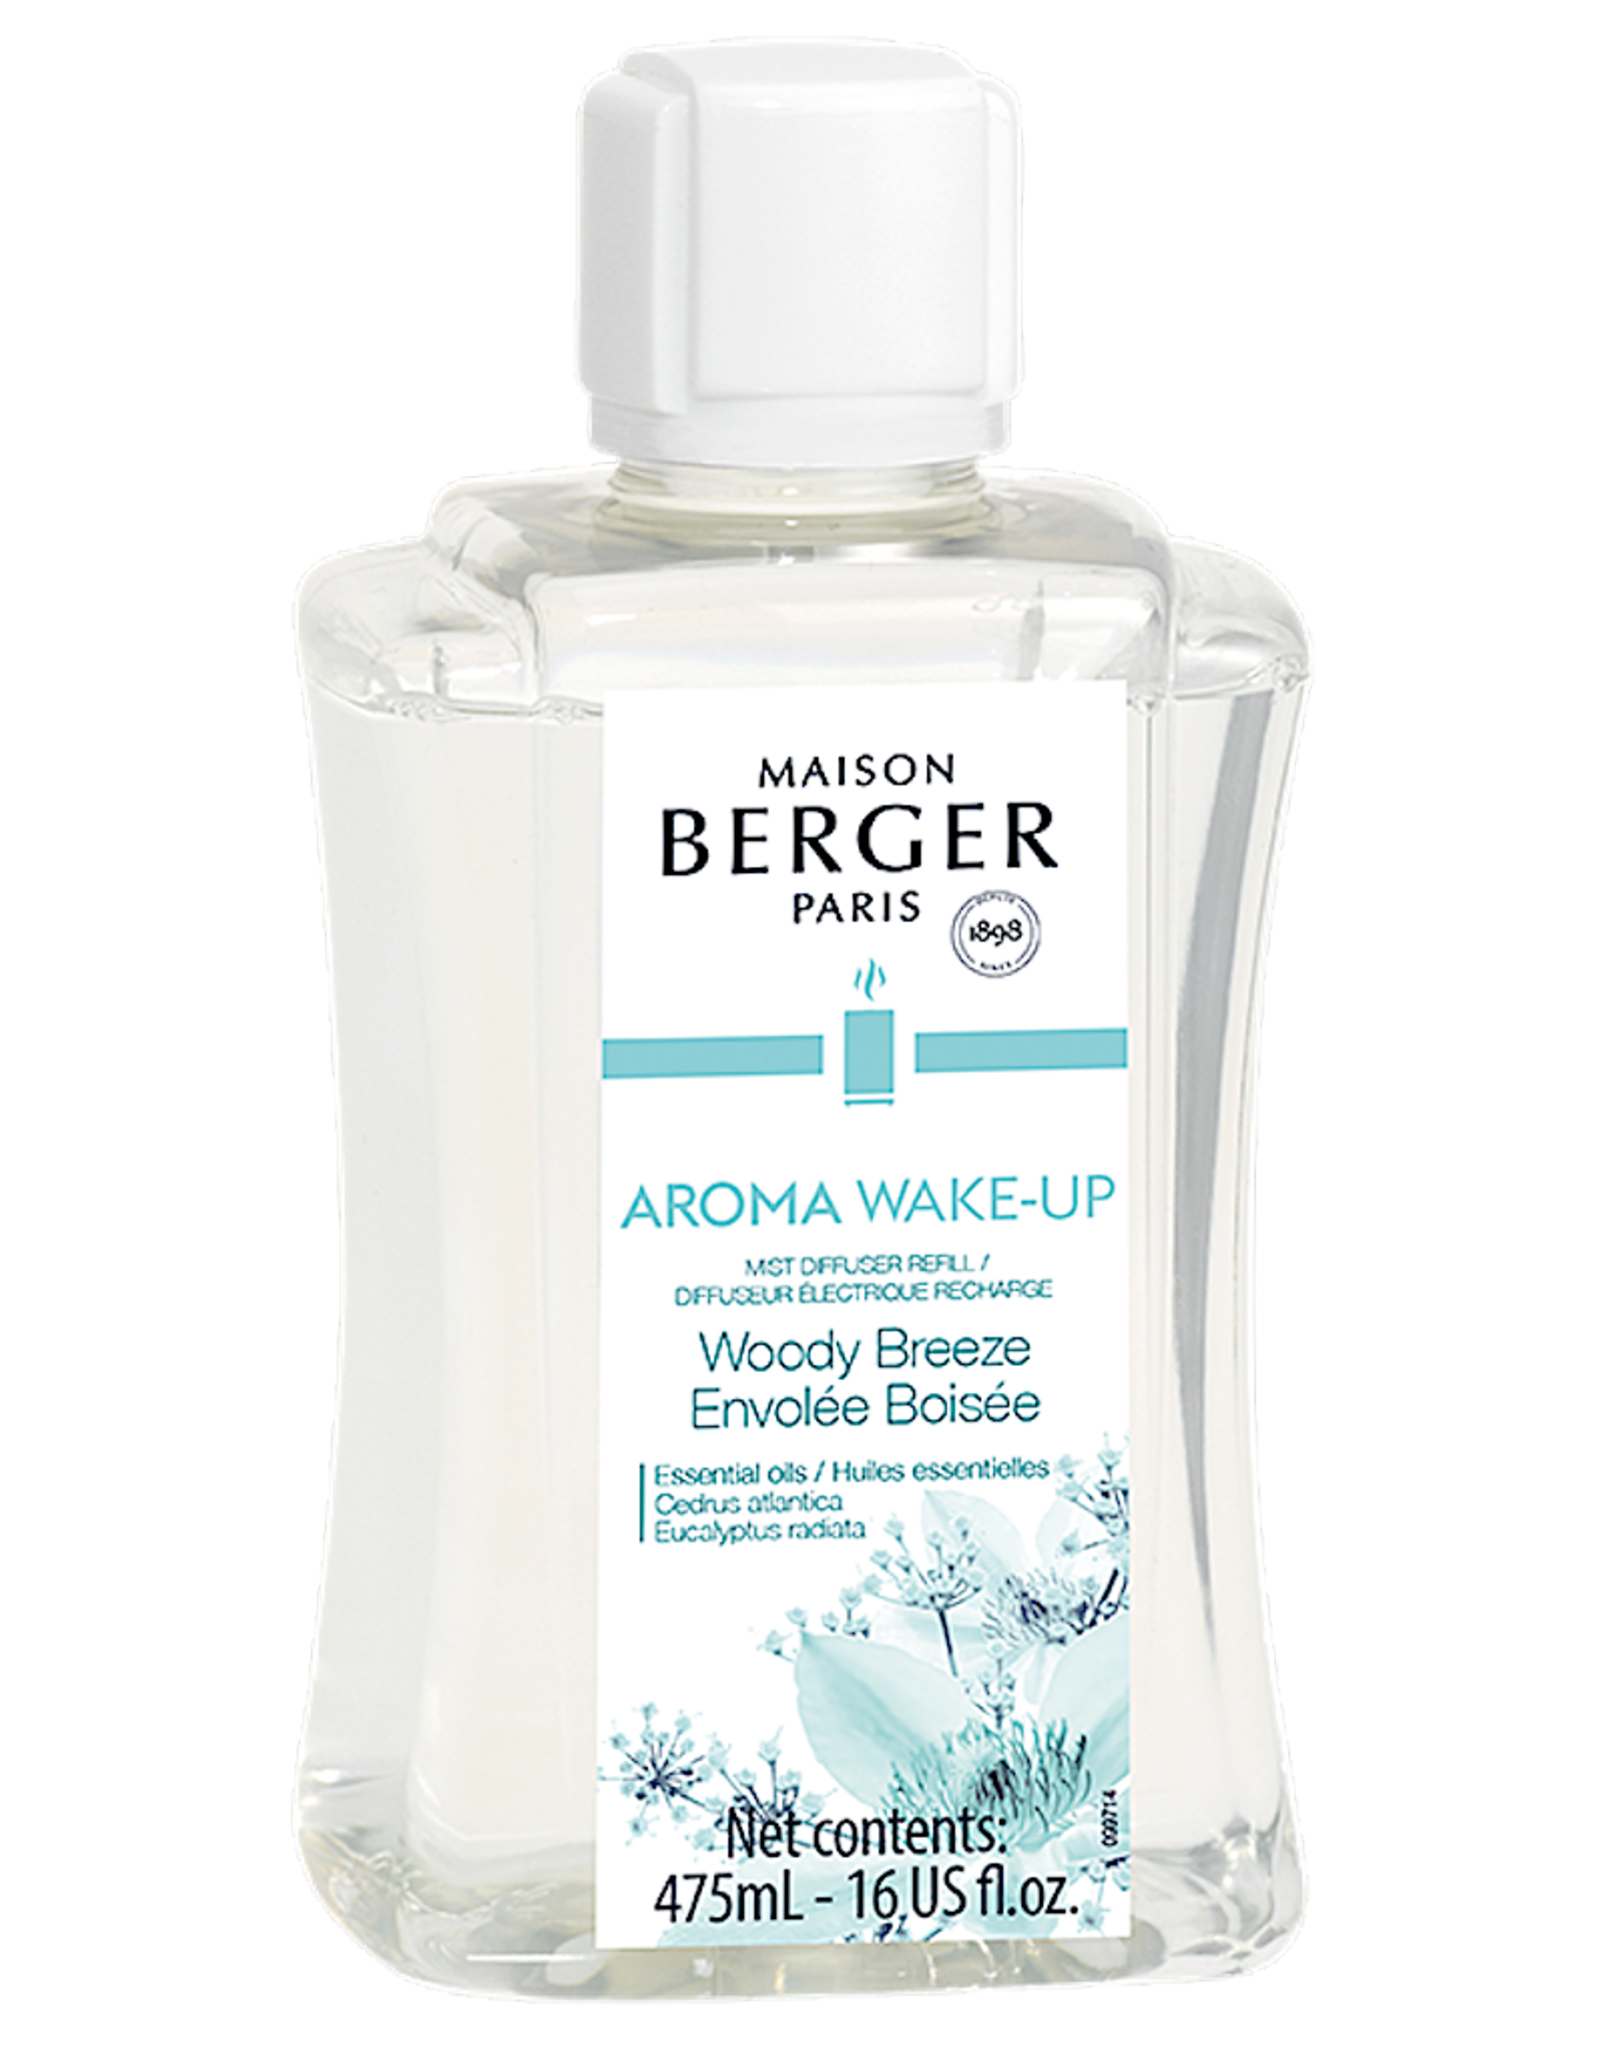 Maison Berger Mist Diffuser Fragrance 475ml Refill Aroma Wake Up Woody Breeze